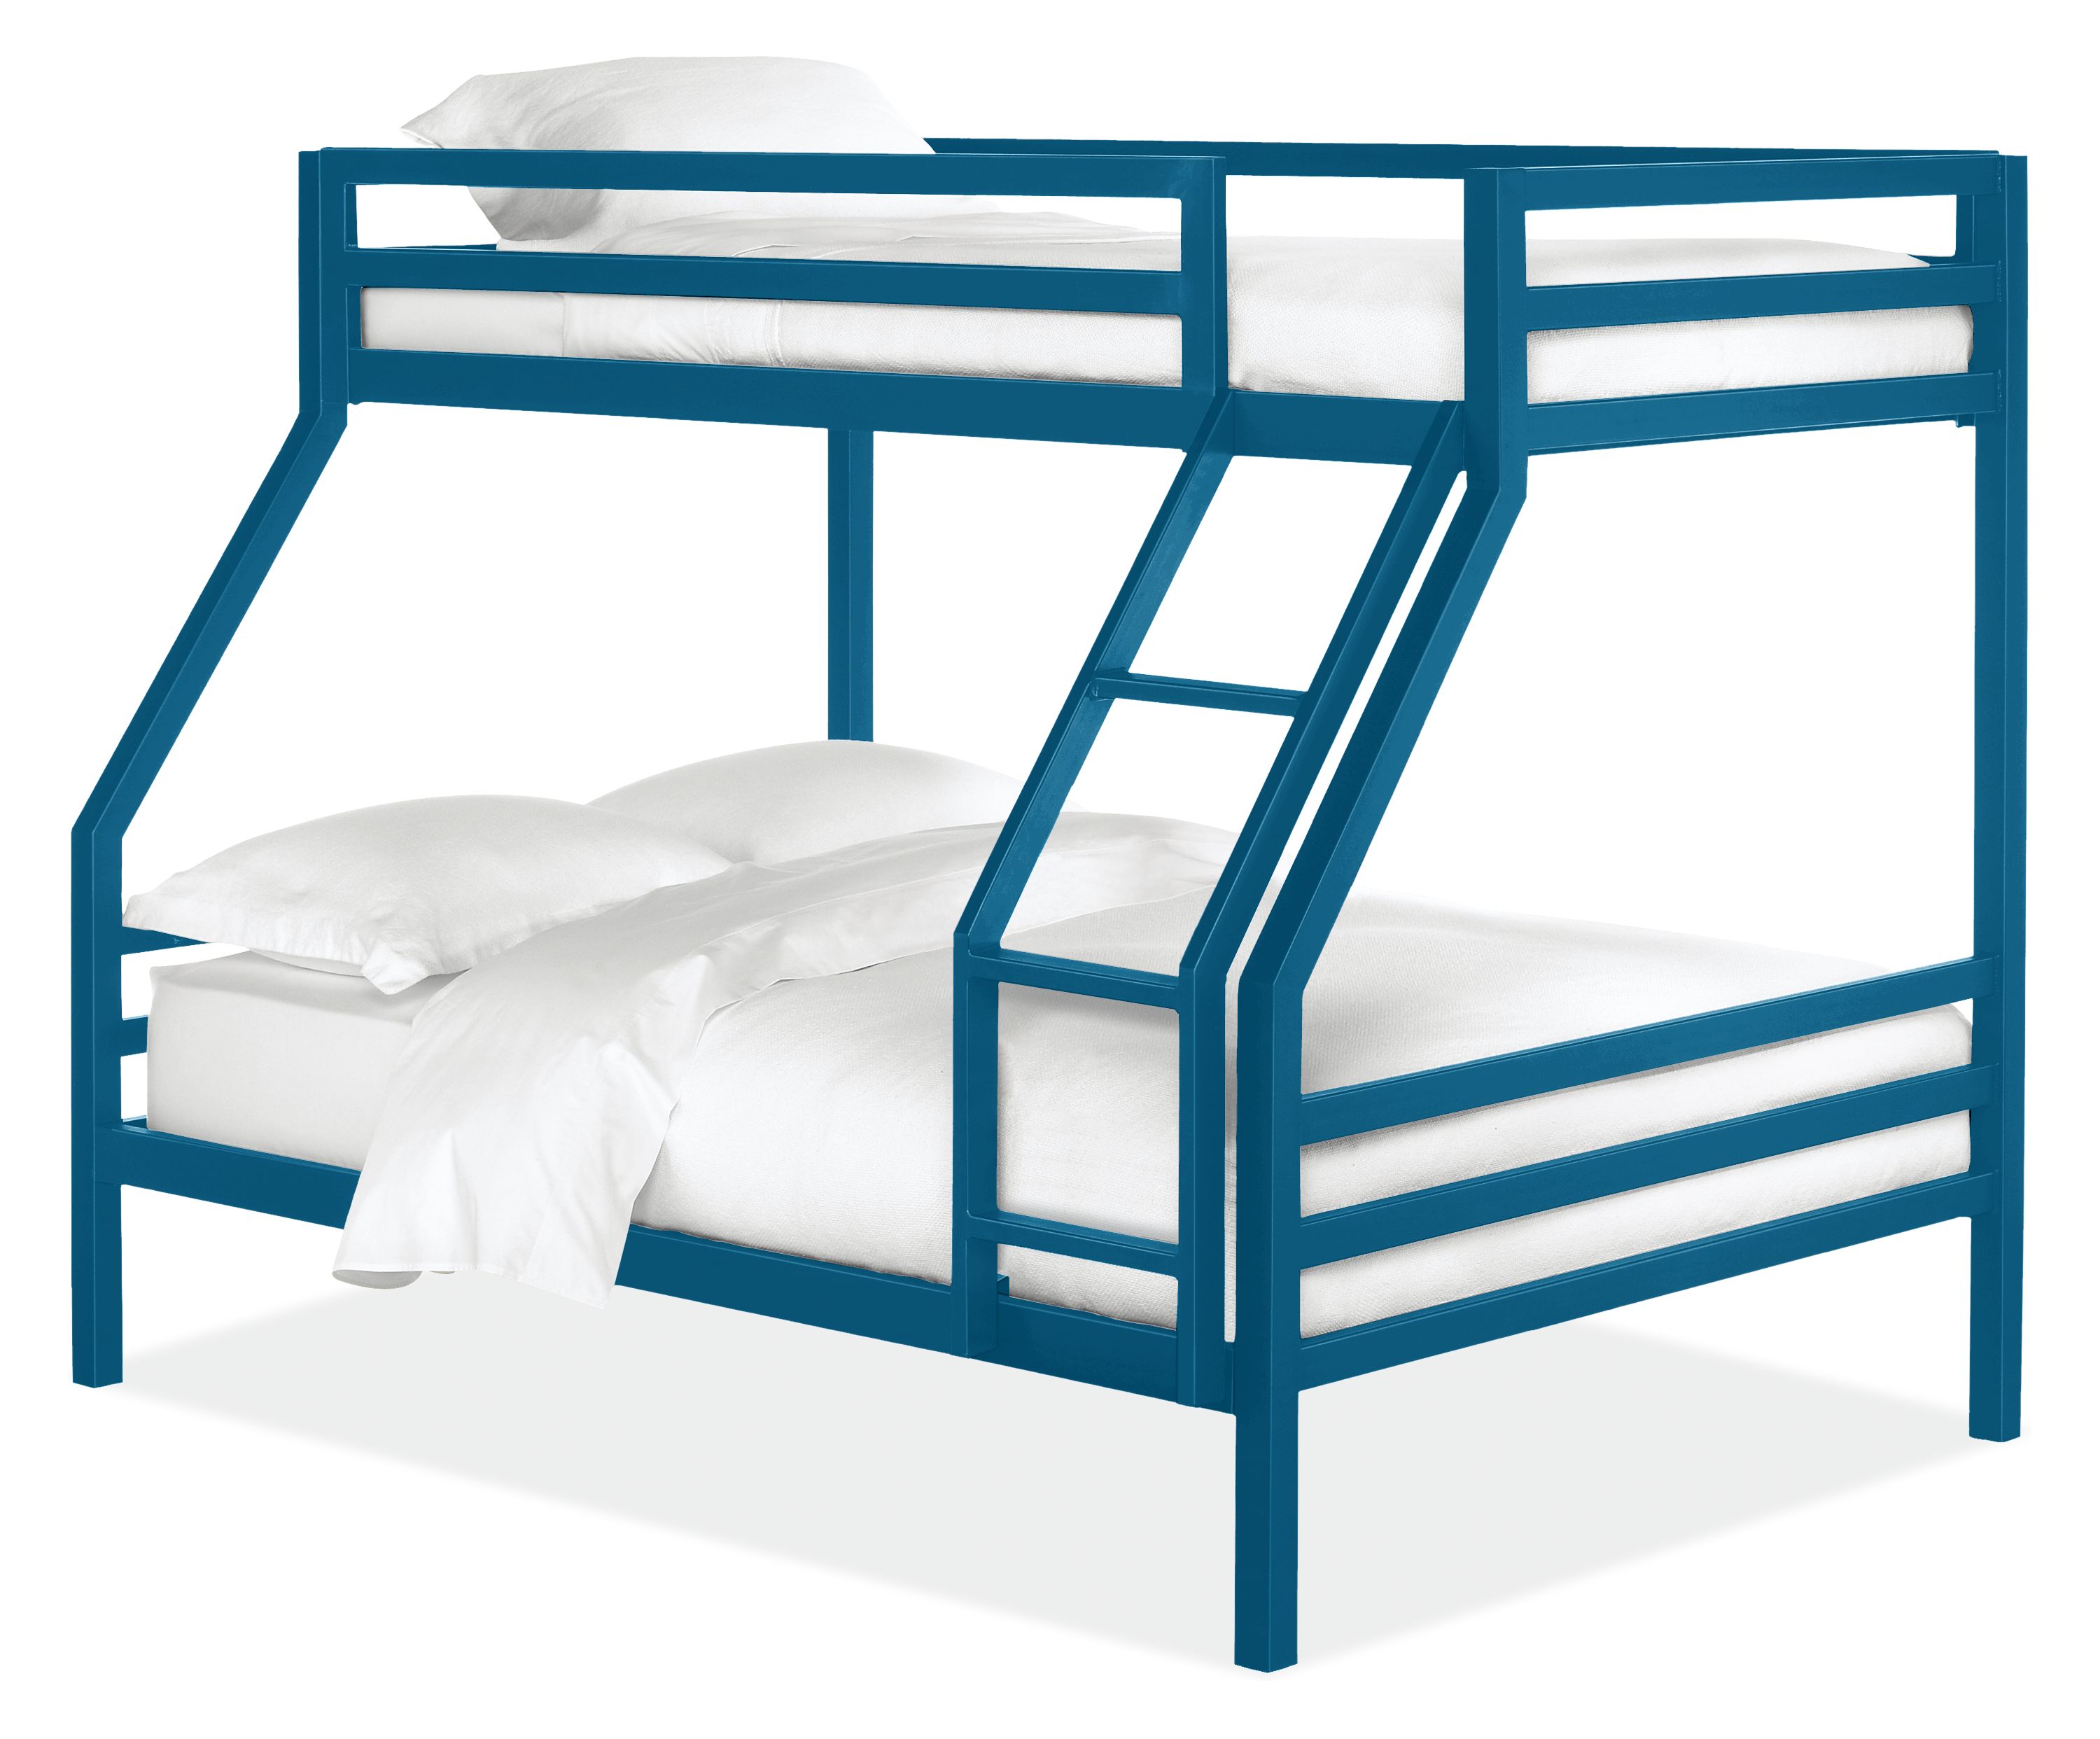 Fort Bunk Beds In Colors Twin Over, Full Over Full Bunk Beds That Separate